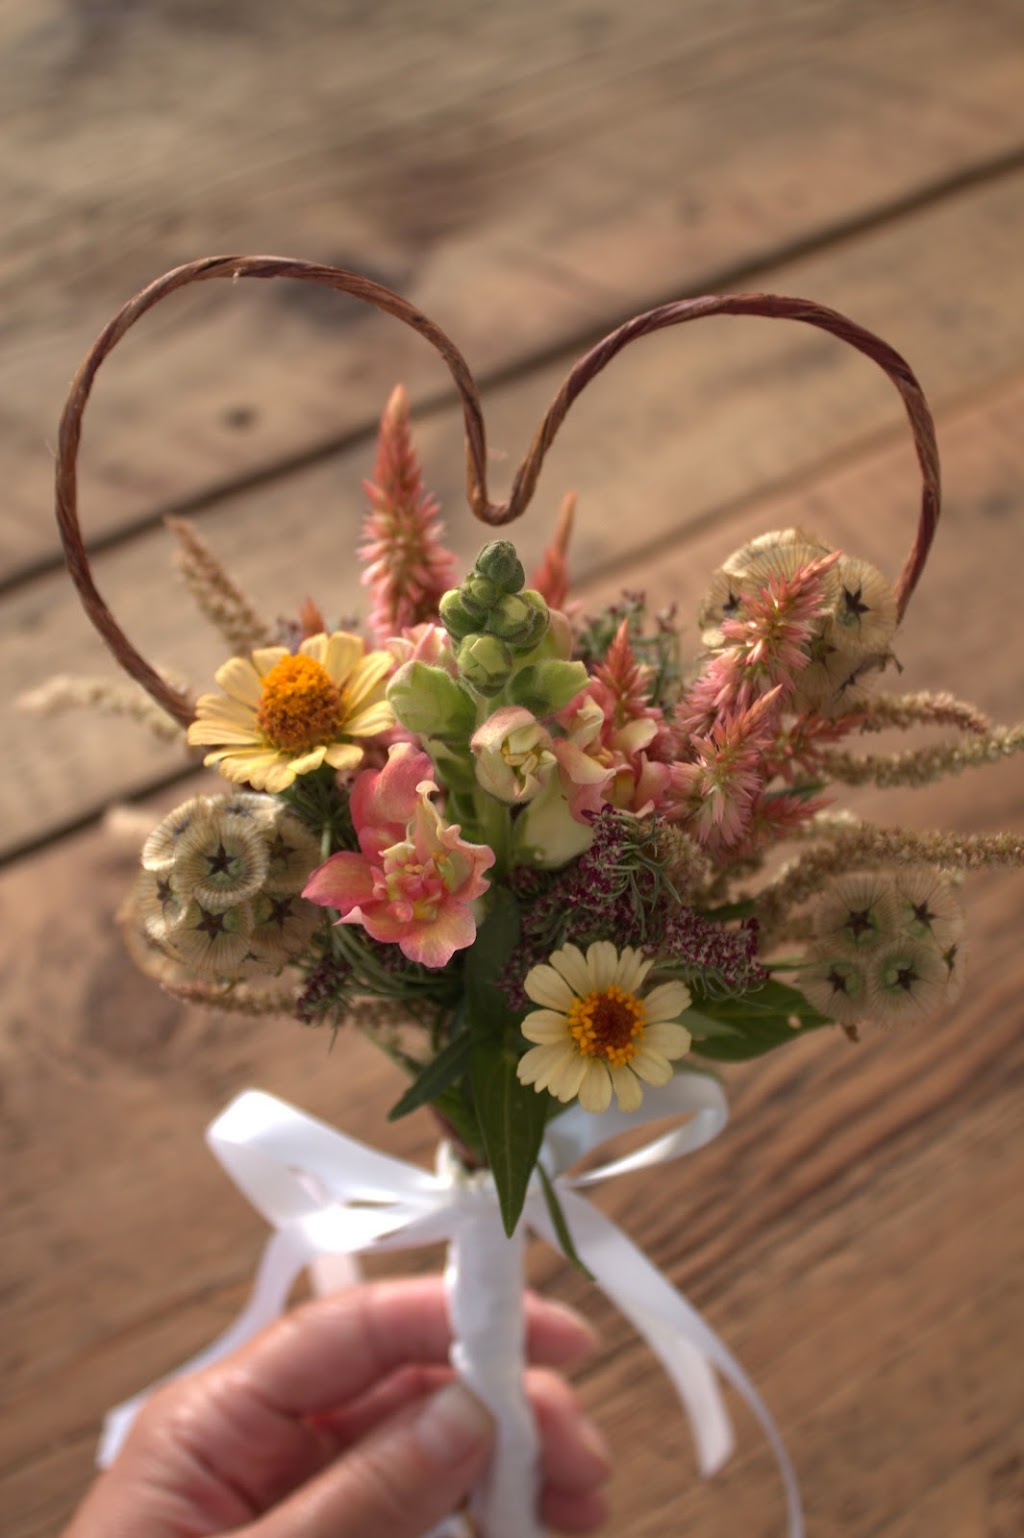 Flowers From 12th | 38 S 12th St, Quakertown, PA 18951 | Phone: (267) 772-4420